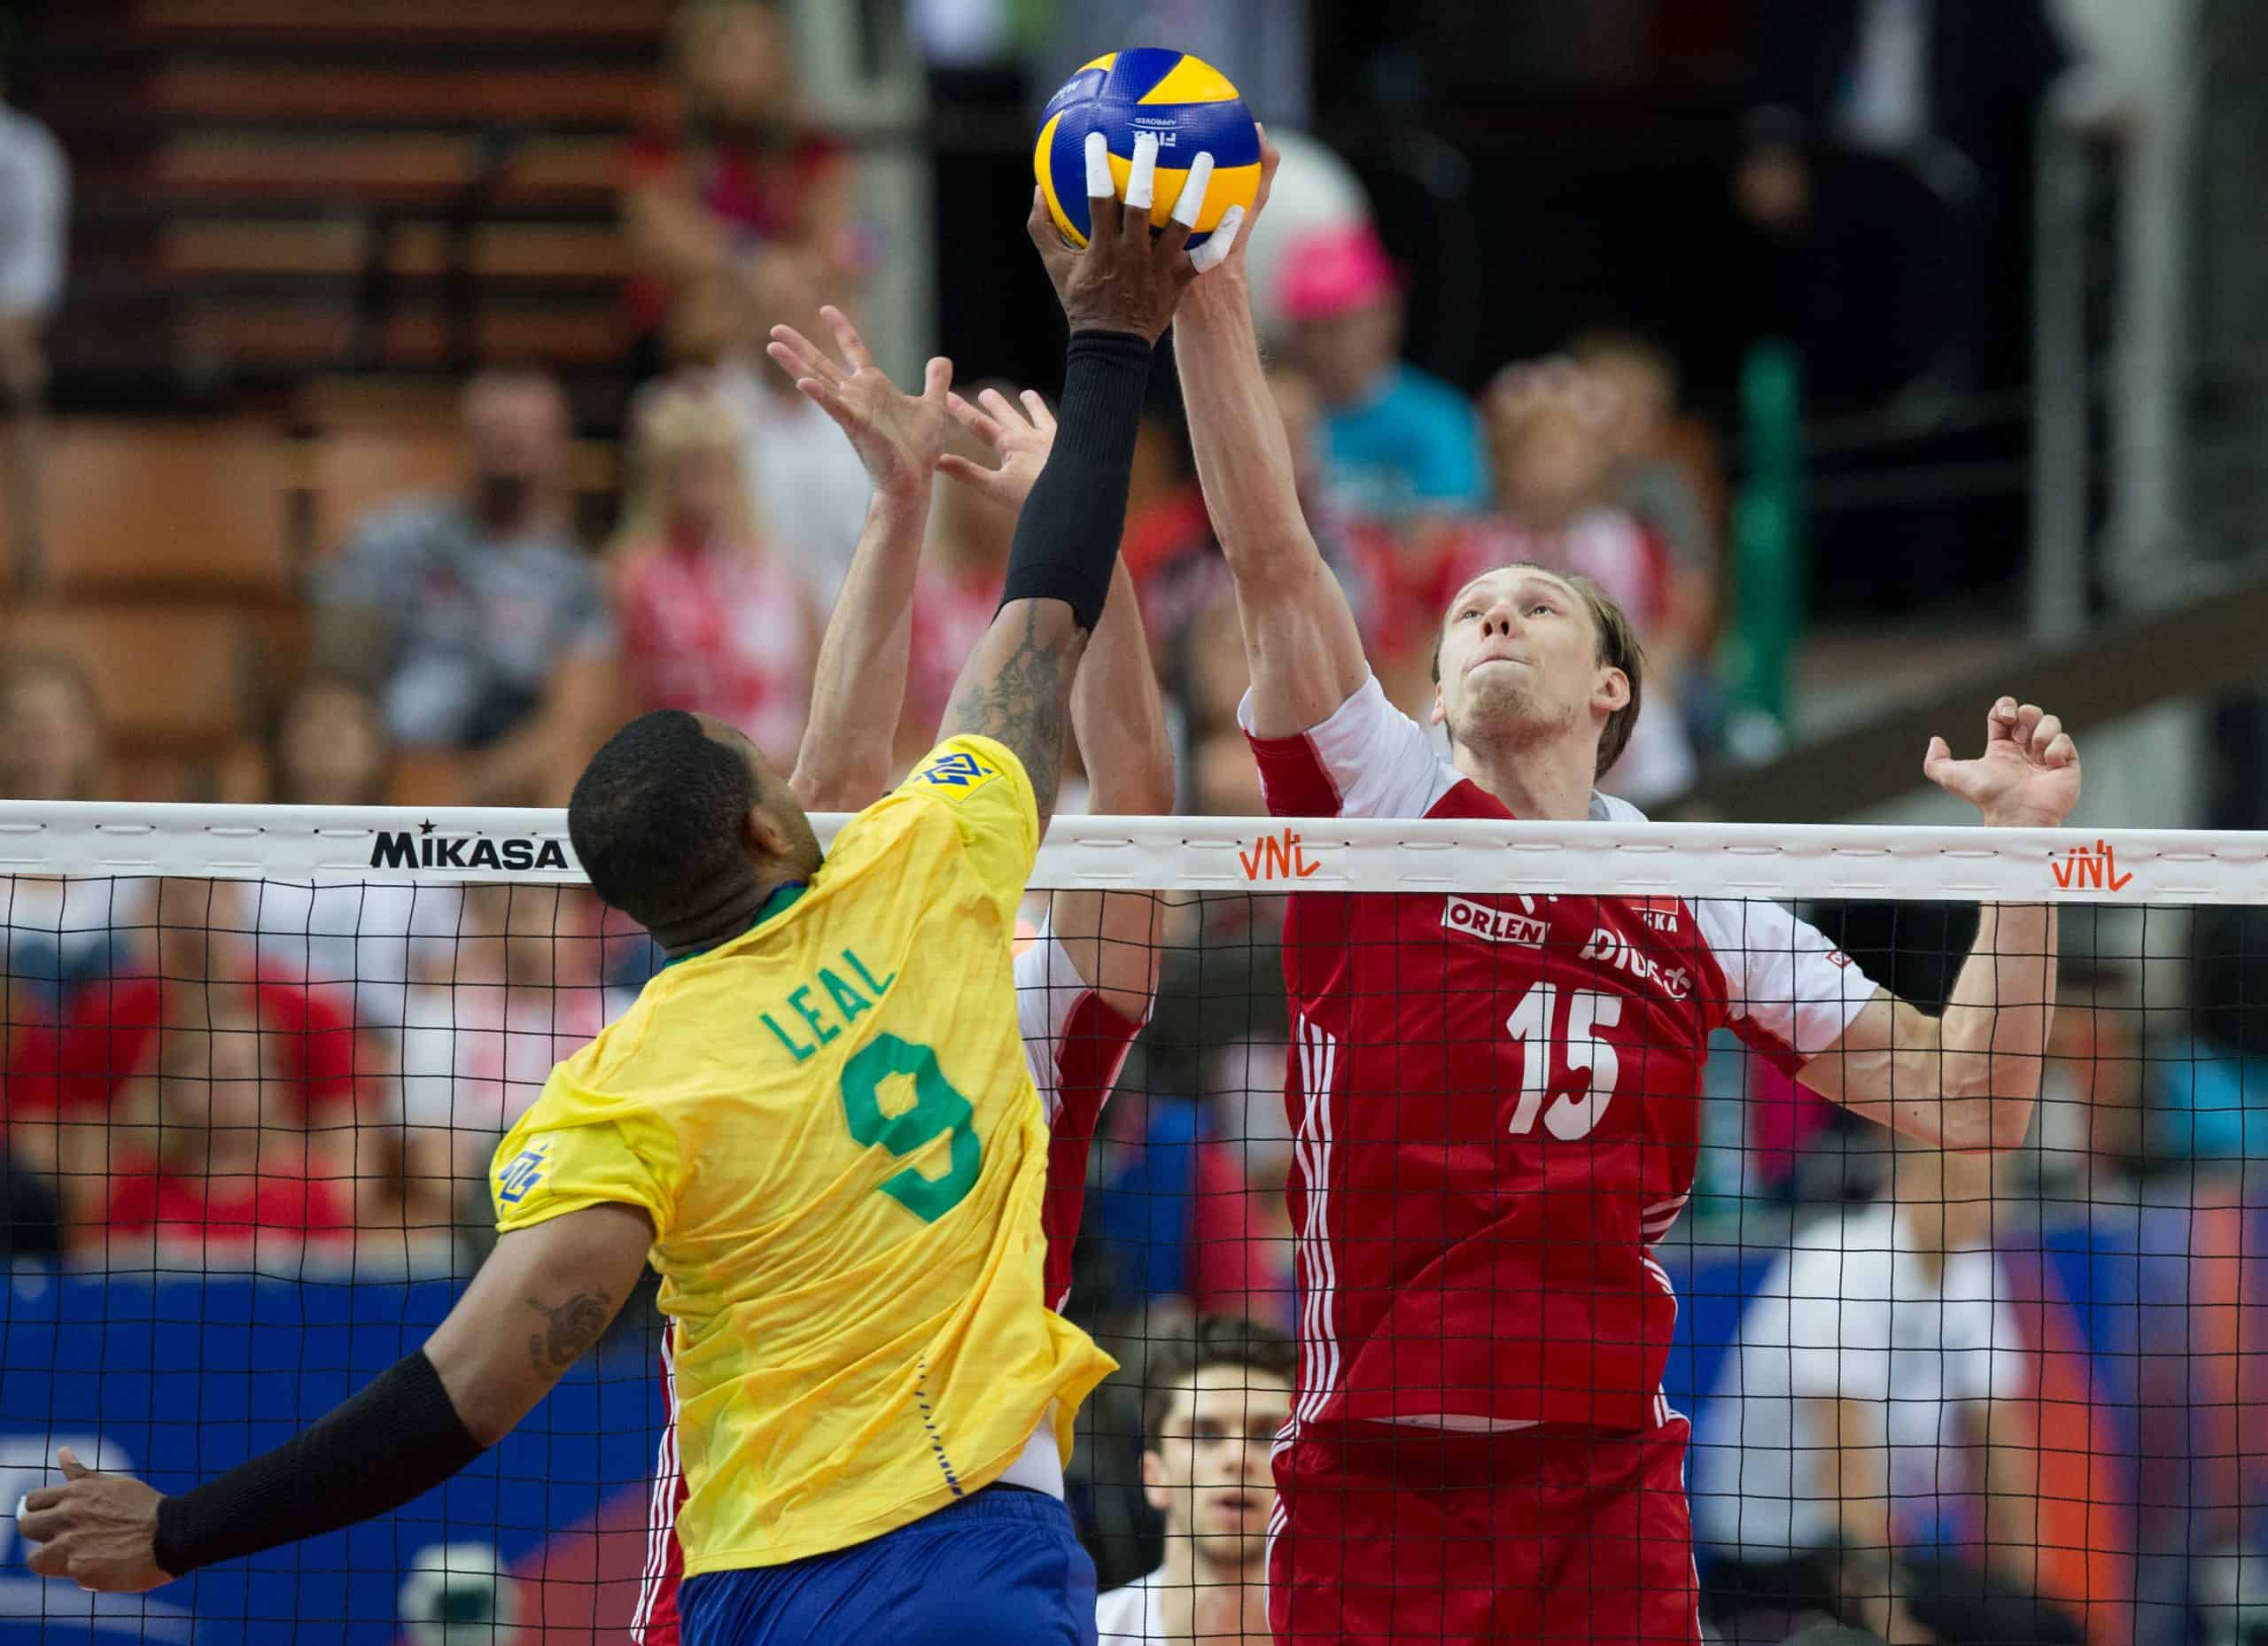 Nations League 2021: Great games in Rimini. Poland failed to beat Brazil in the final